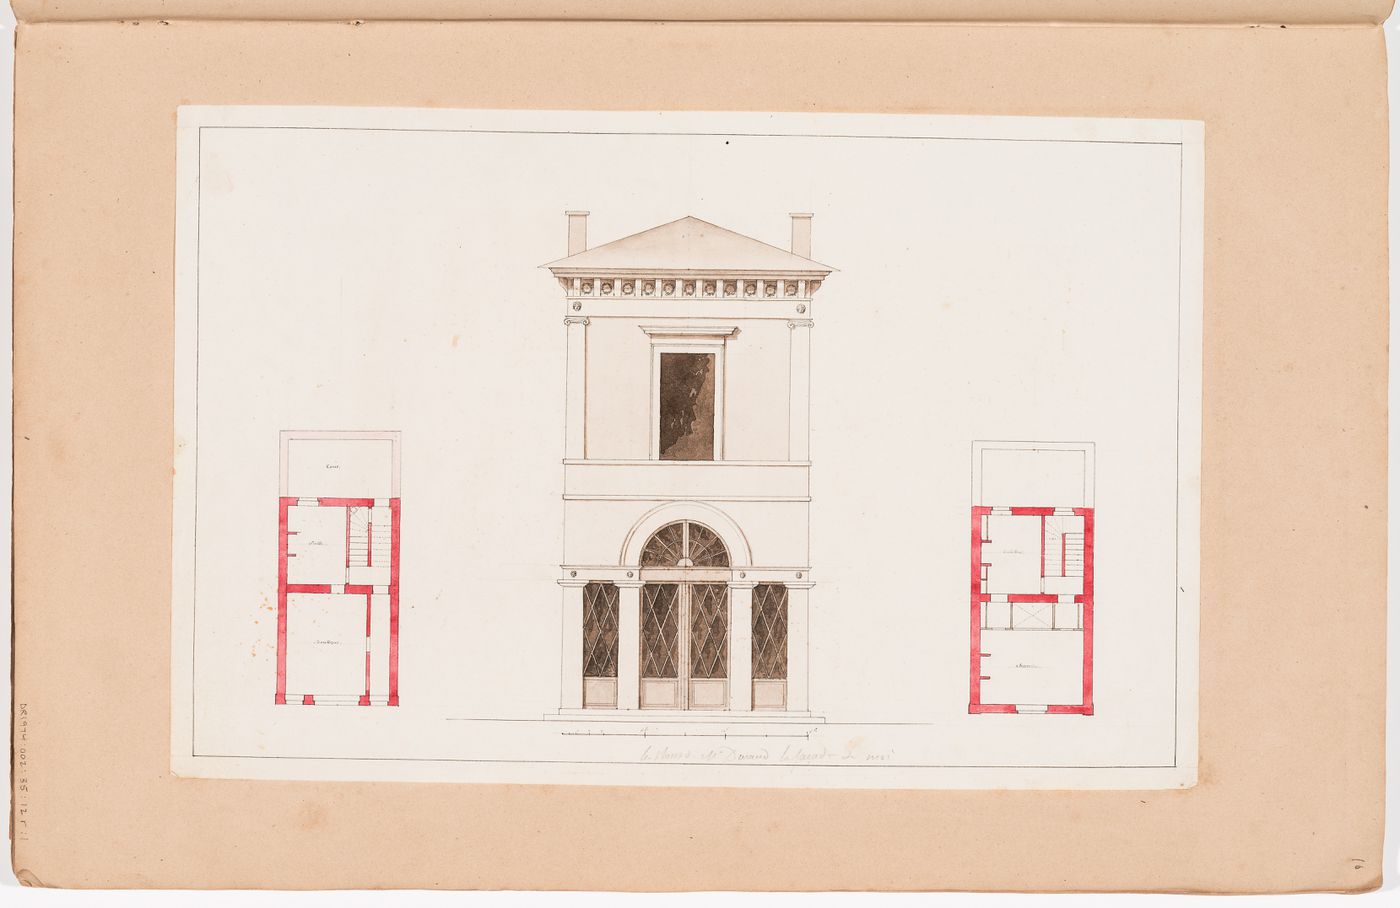 Front elevation and ground and first floor plans for a small two-storey town house; verso: Sketch elevation, site plan, and plans for a house and garden on rue Saint-Romain, Paris